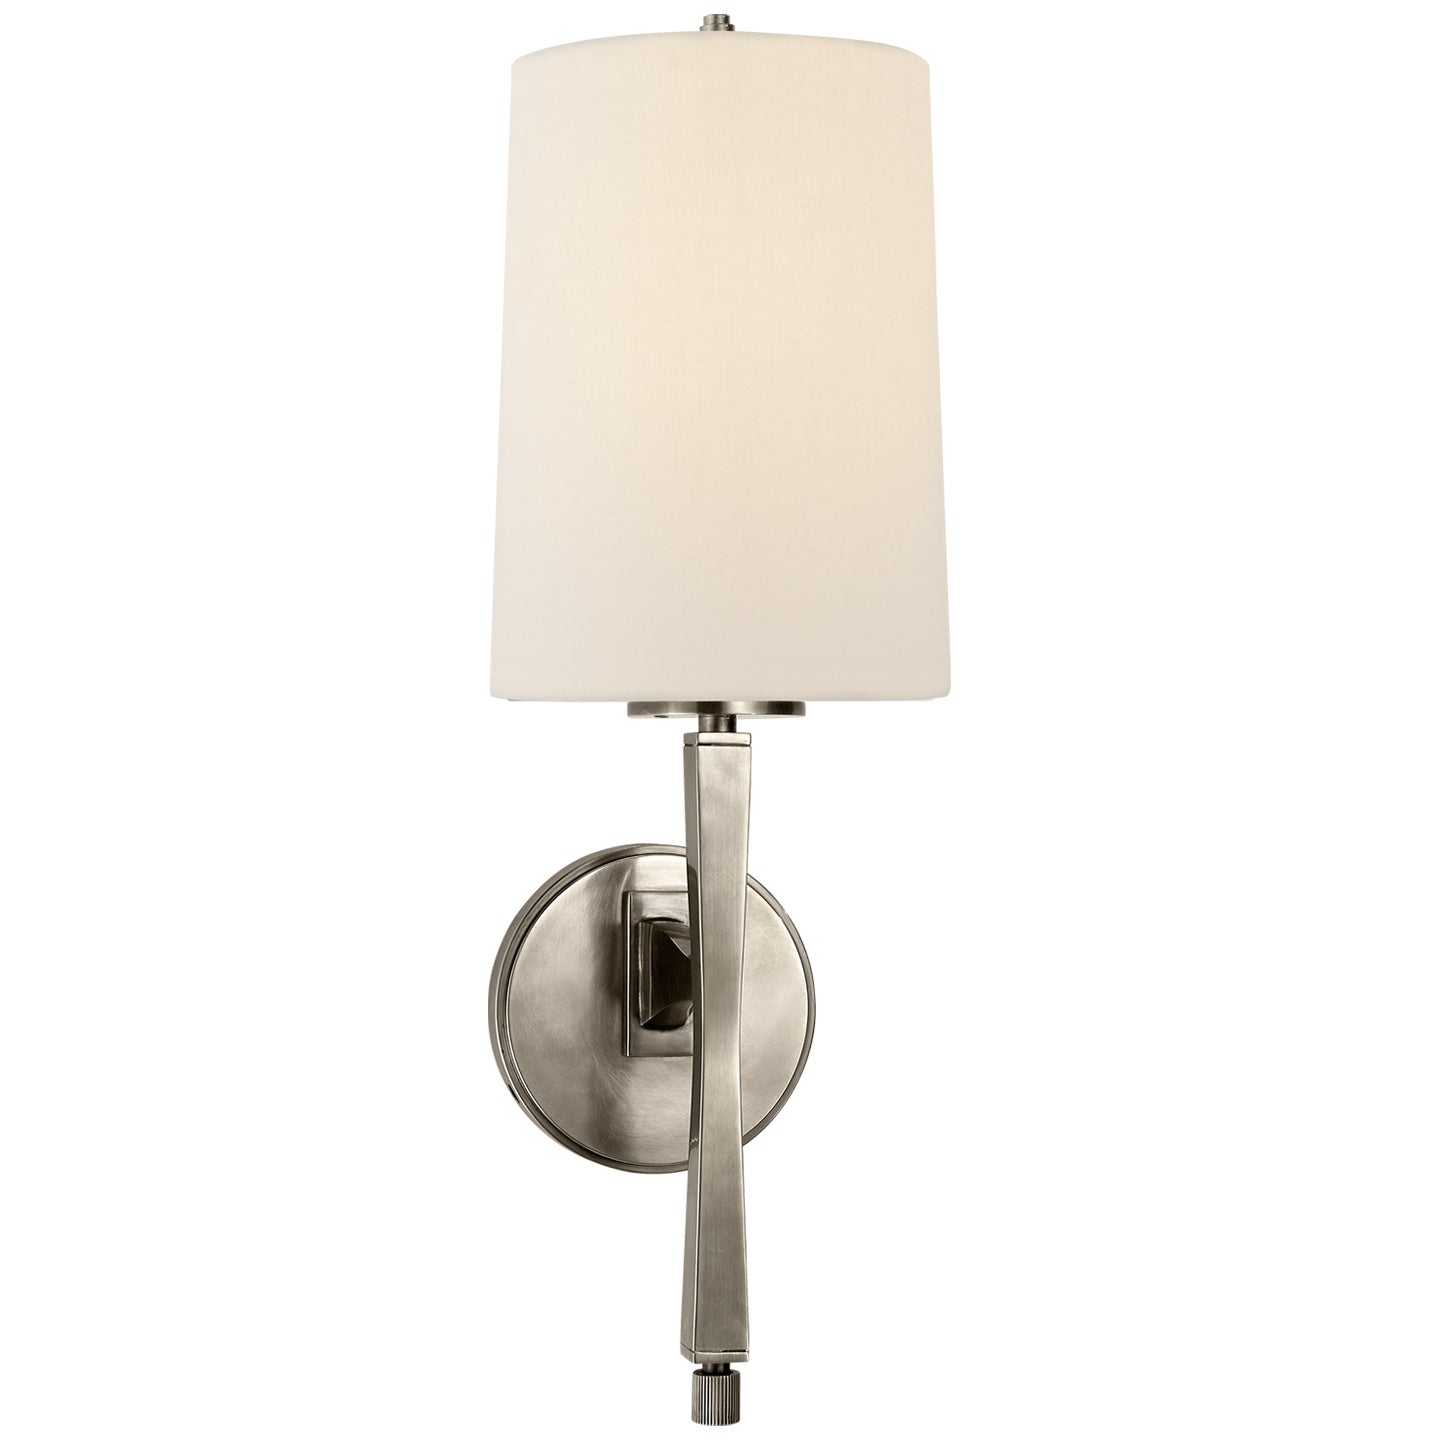 Visual Comfort Signature - TOB 2740AN-L - One Light Wall Sconce - Edie - Antique Nickel